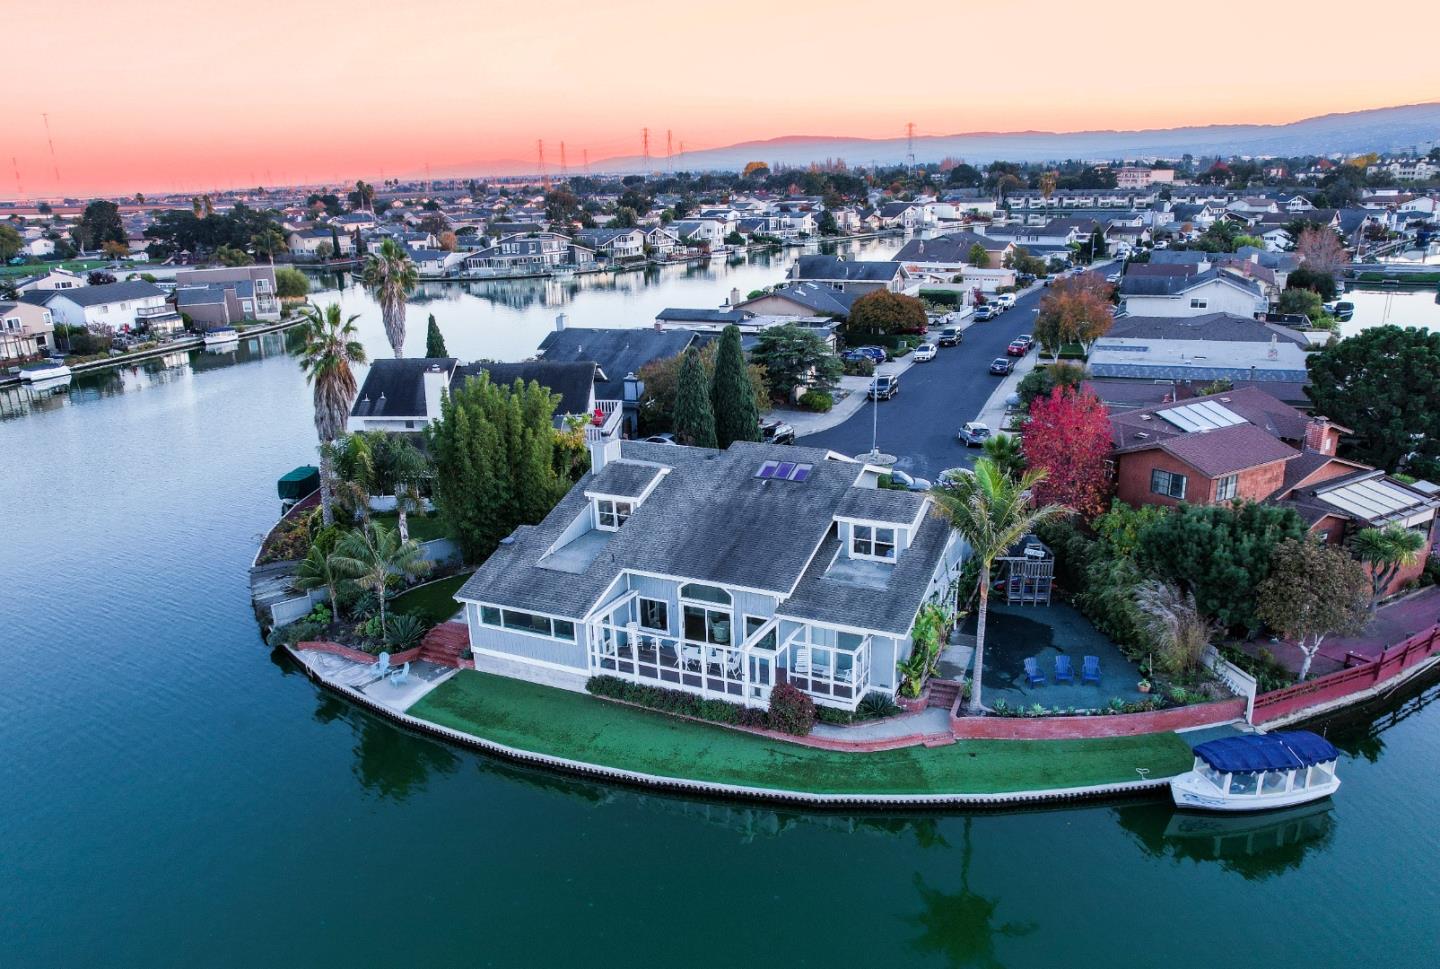 Located on one of the most desirable Isles in Foster City, this stunning two-story waterfront, over 4,000sqft, 5-bed, 3.5-bath, home w/custom wood finishes & hardwood floors, is unparalleled in elegance & modern comforts. Personally designed for extended water views, this sun-filled home infuses the best of indoor/outdoor living w/oversized glass doors that open to a gorgeous wind-protected deck from the great room, an intimate sitting area with w/fireplace, & custom built-ins. The gourmet kitchen is built for entertaining w/ a generous-sized stone-topped island, high-end appliances, & a walk-in pantry.  With 3 bedrooms on the main floor, including the luxurious owner's suite w/ outdoor access, a walk-in closet, and a luxurious spa-type bath with a glass shower. The upper level is designed around a large loft suited for a media room or additional guest space. Two Cape Cod-style sloped and angled ceiling bedrooms w/ an impressive Jack & Jill bathroom sure to make you take a second look.